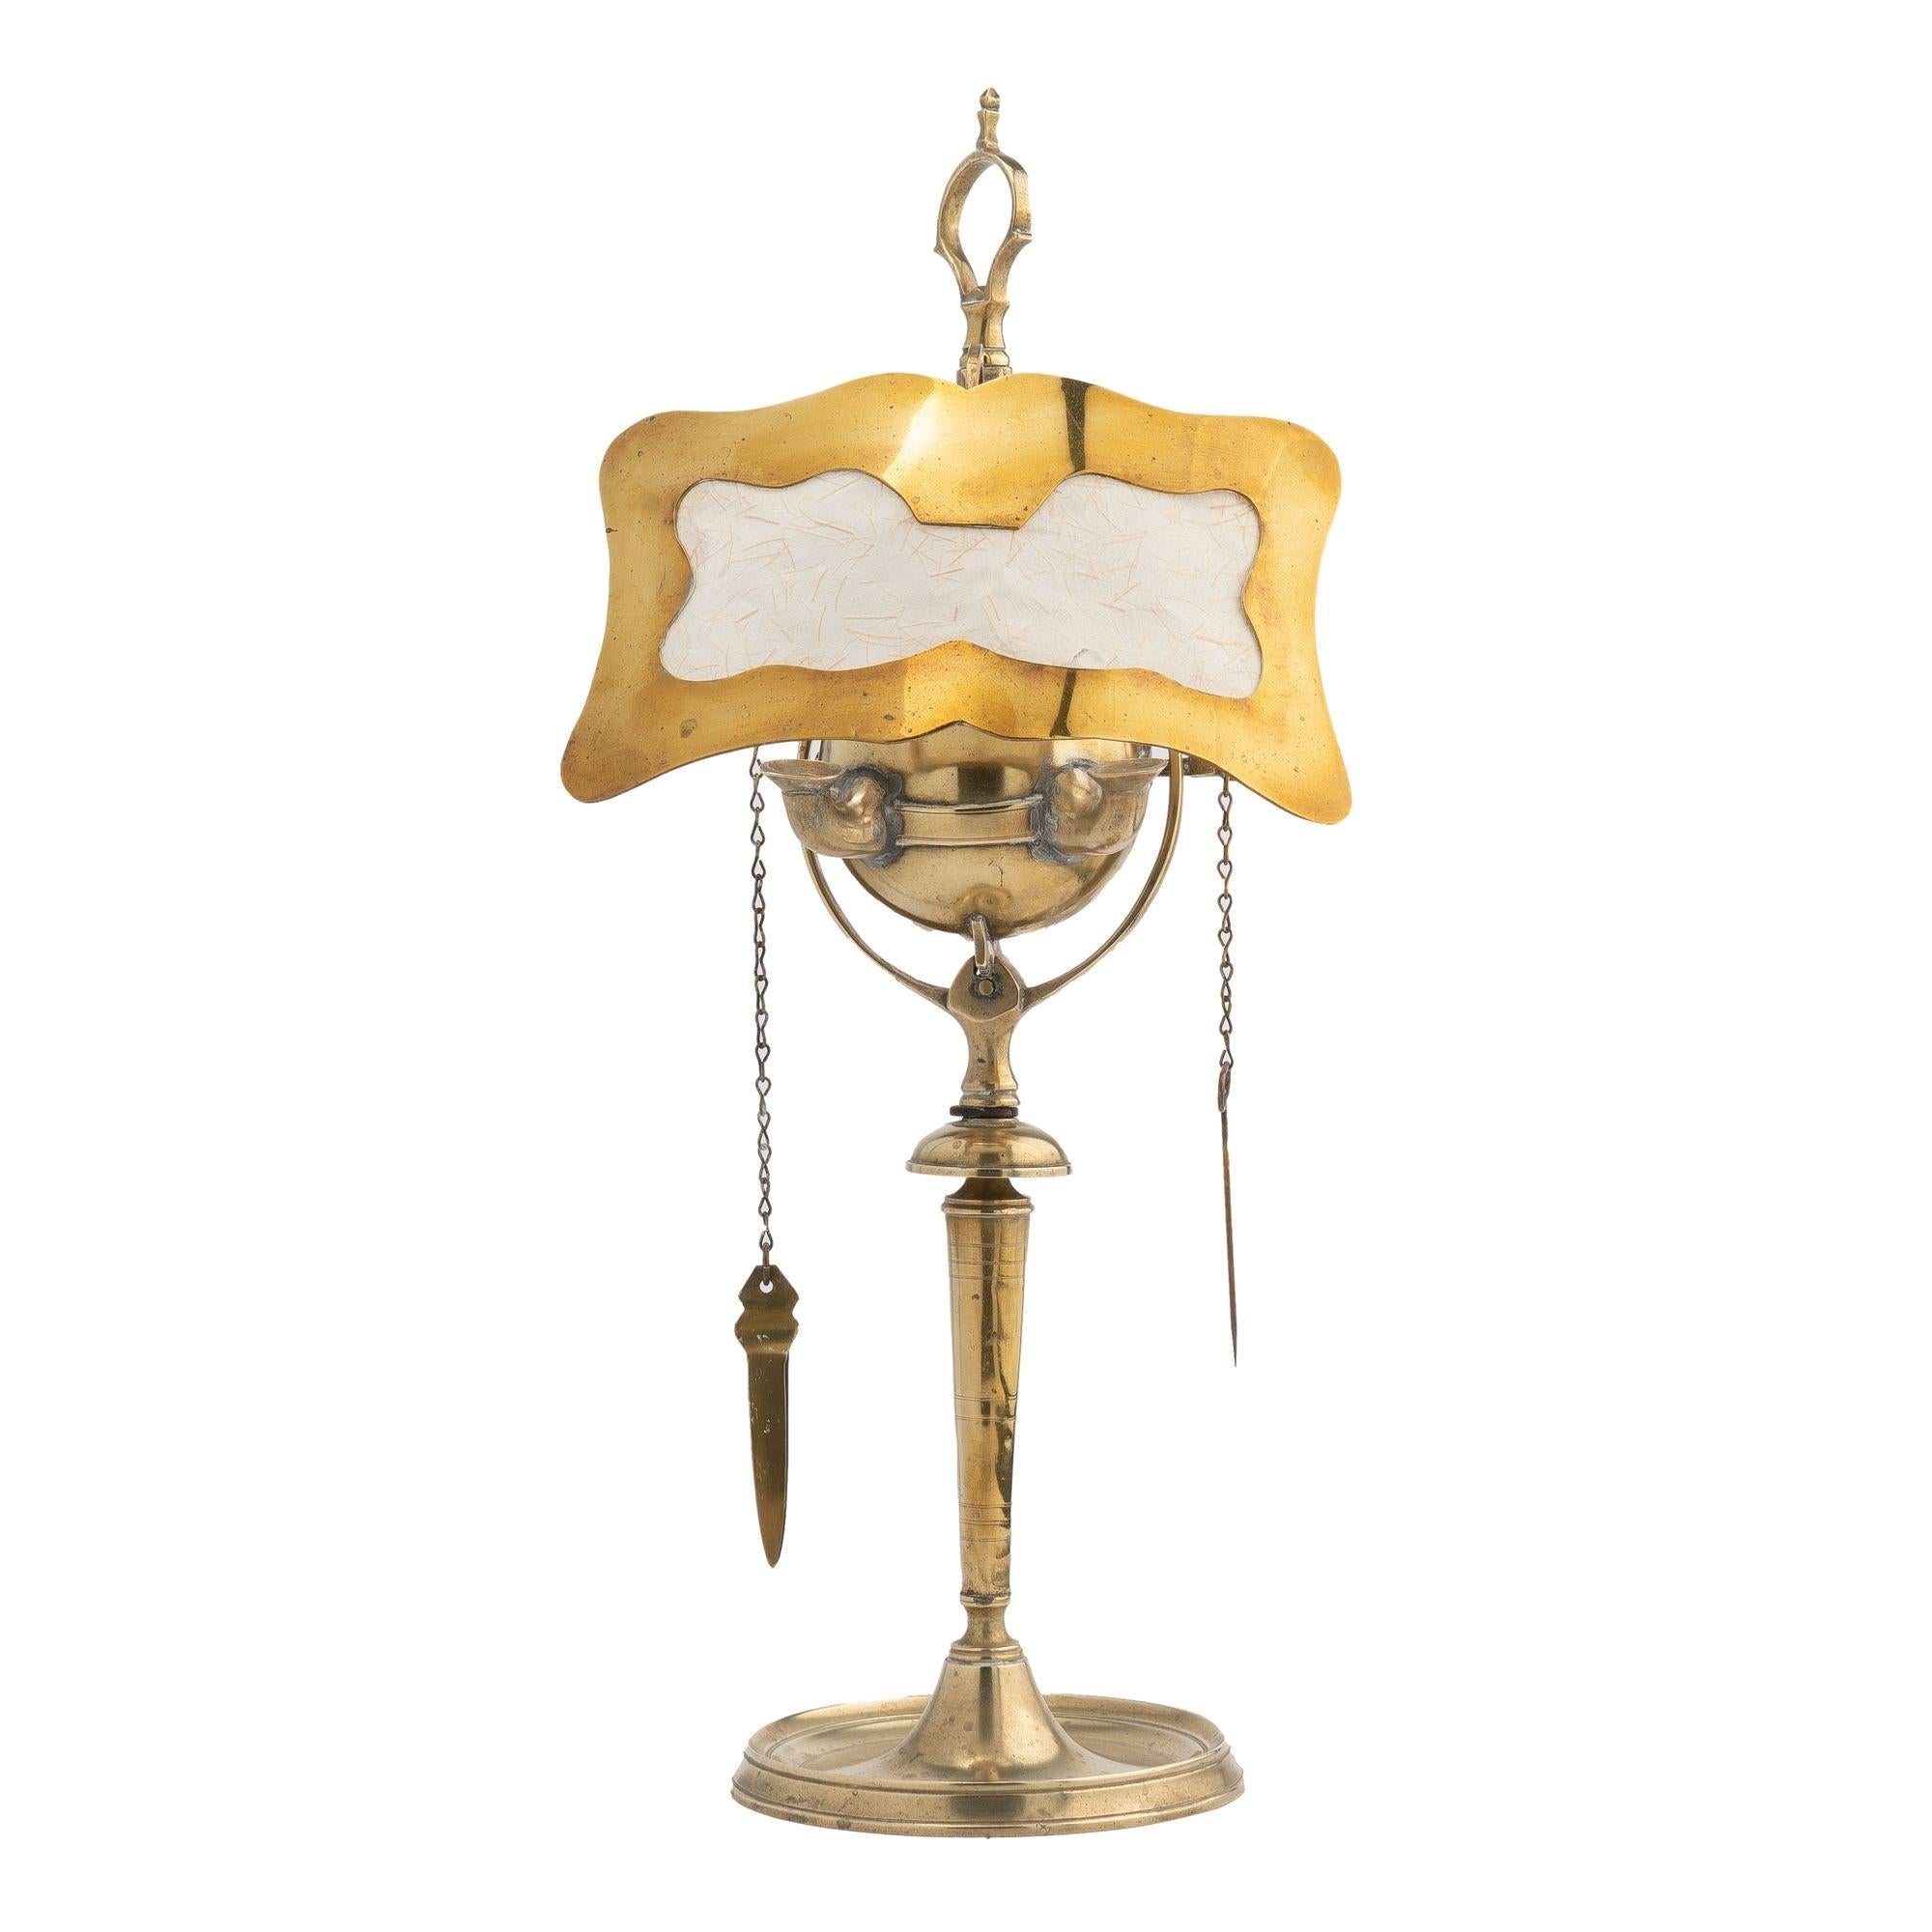 Cast brass two burner Lucerne oil lamp with hanging wick implements and fitted with its original brass deflector shade with rice paper insert.
Italian, circa 1800.